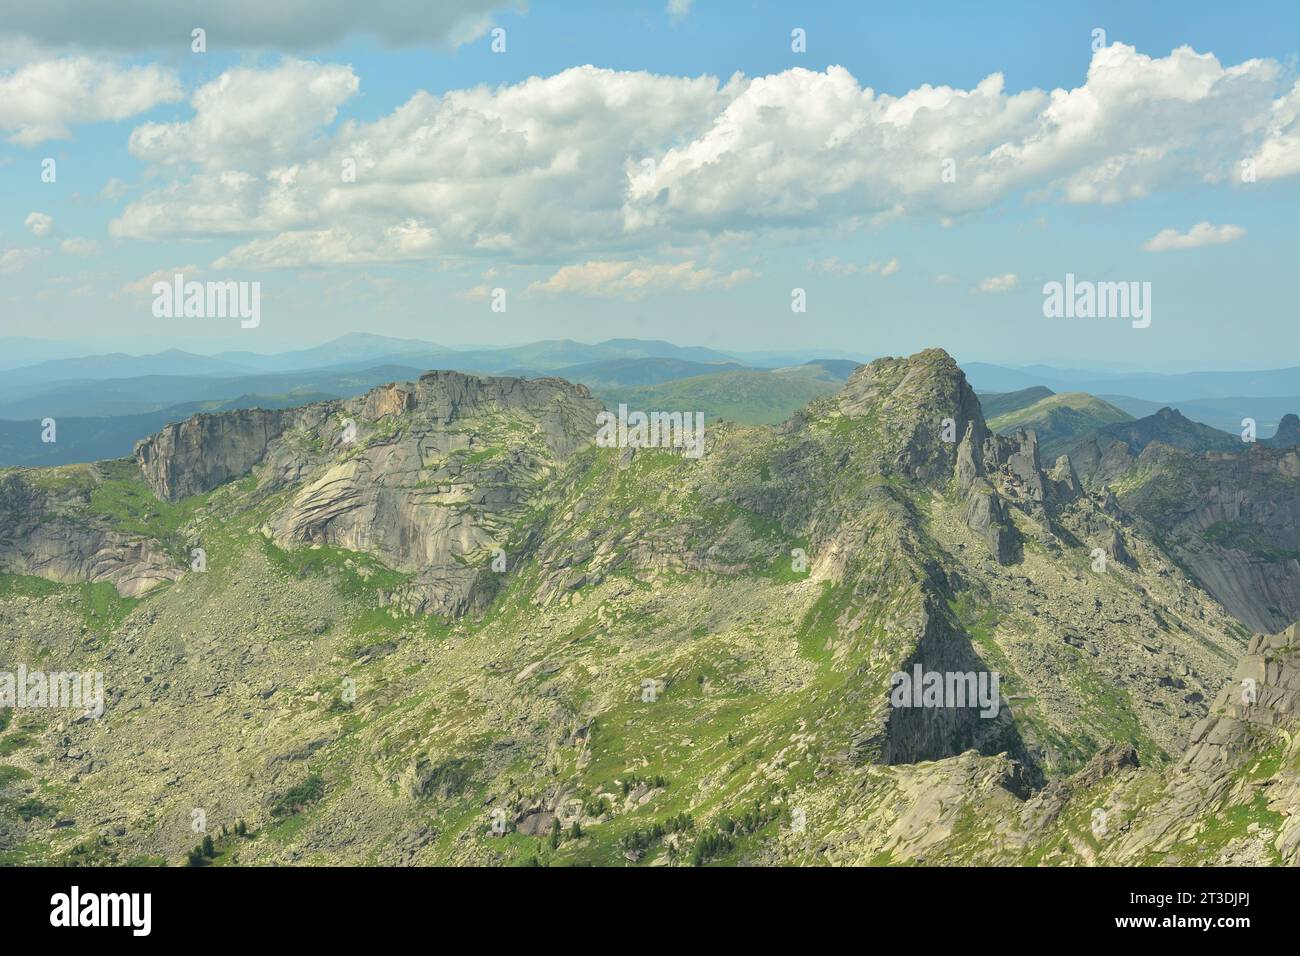 A high rocky massif with peaked peaks partially overgrown with grass under a cloudy summer sky. Natural park Ergaki, Krasnoyarsk region, Siberia, Russ Stock Photo